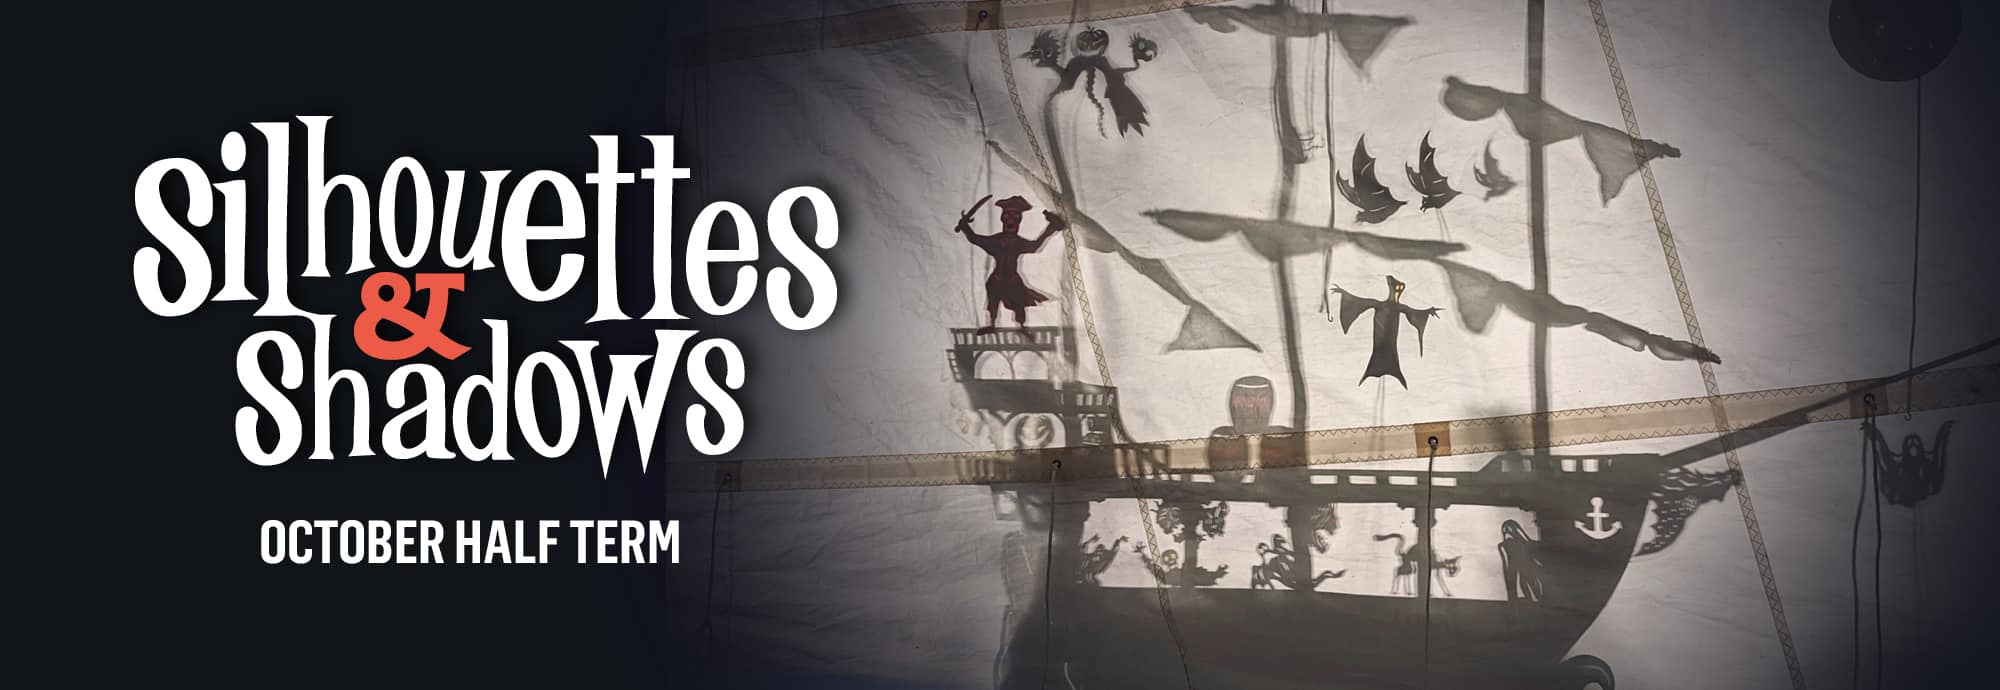 On the left side of the image, 'Silhouettes & Shadows' and 'October half term' is written in white text against a black background. On the right-hand side, a pirate ship is silhouetted against a canvas sail, featuring a pirate, a ghost and a few bats.